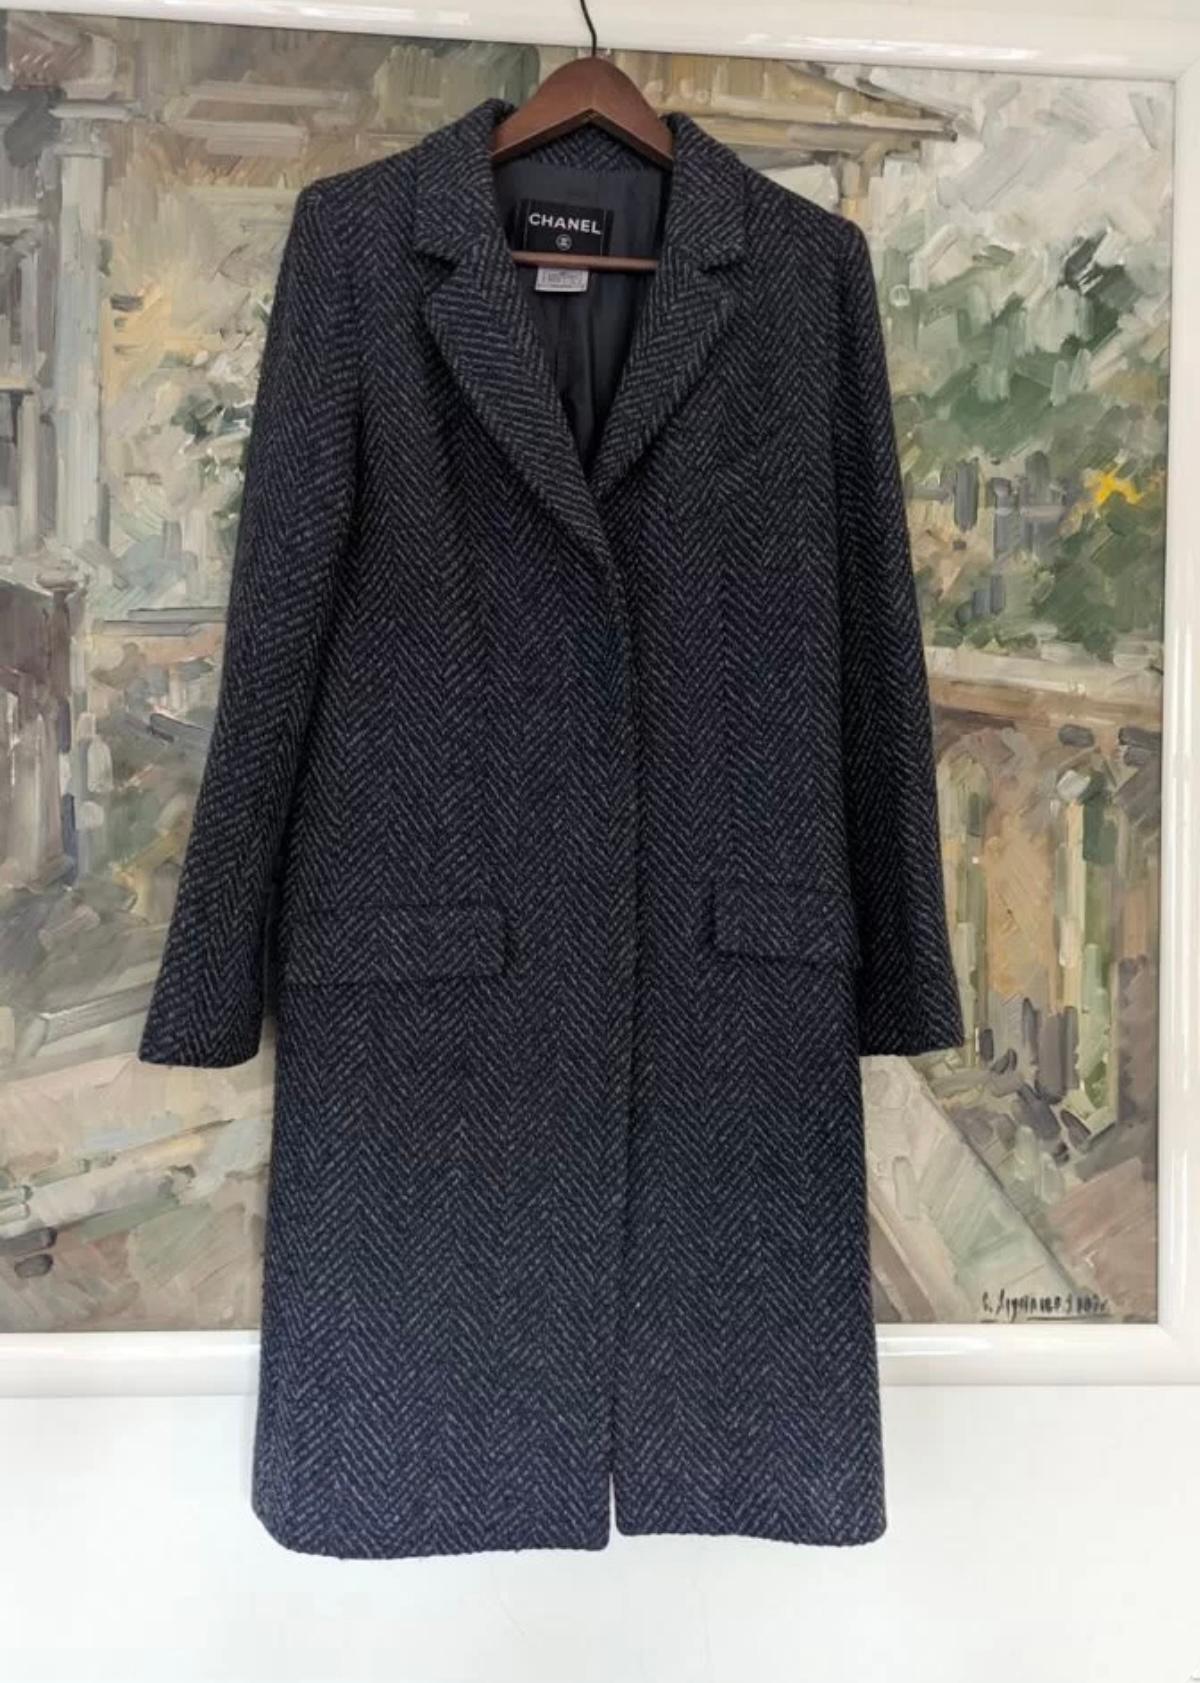 Chanel  Paris / London Collection Maxi Tweed Coat In Excellent Condition For Sale In Dubai, AE